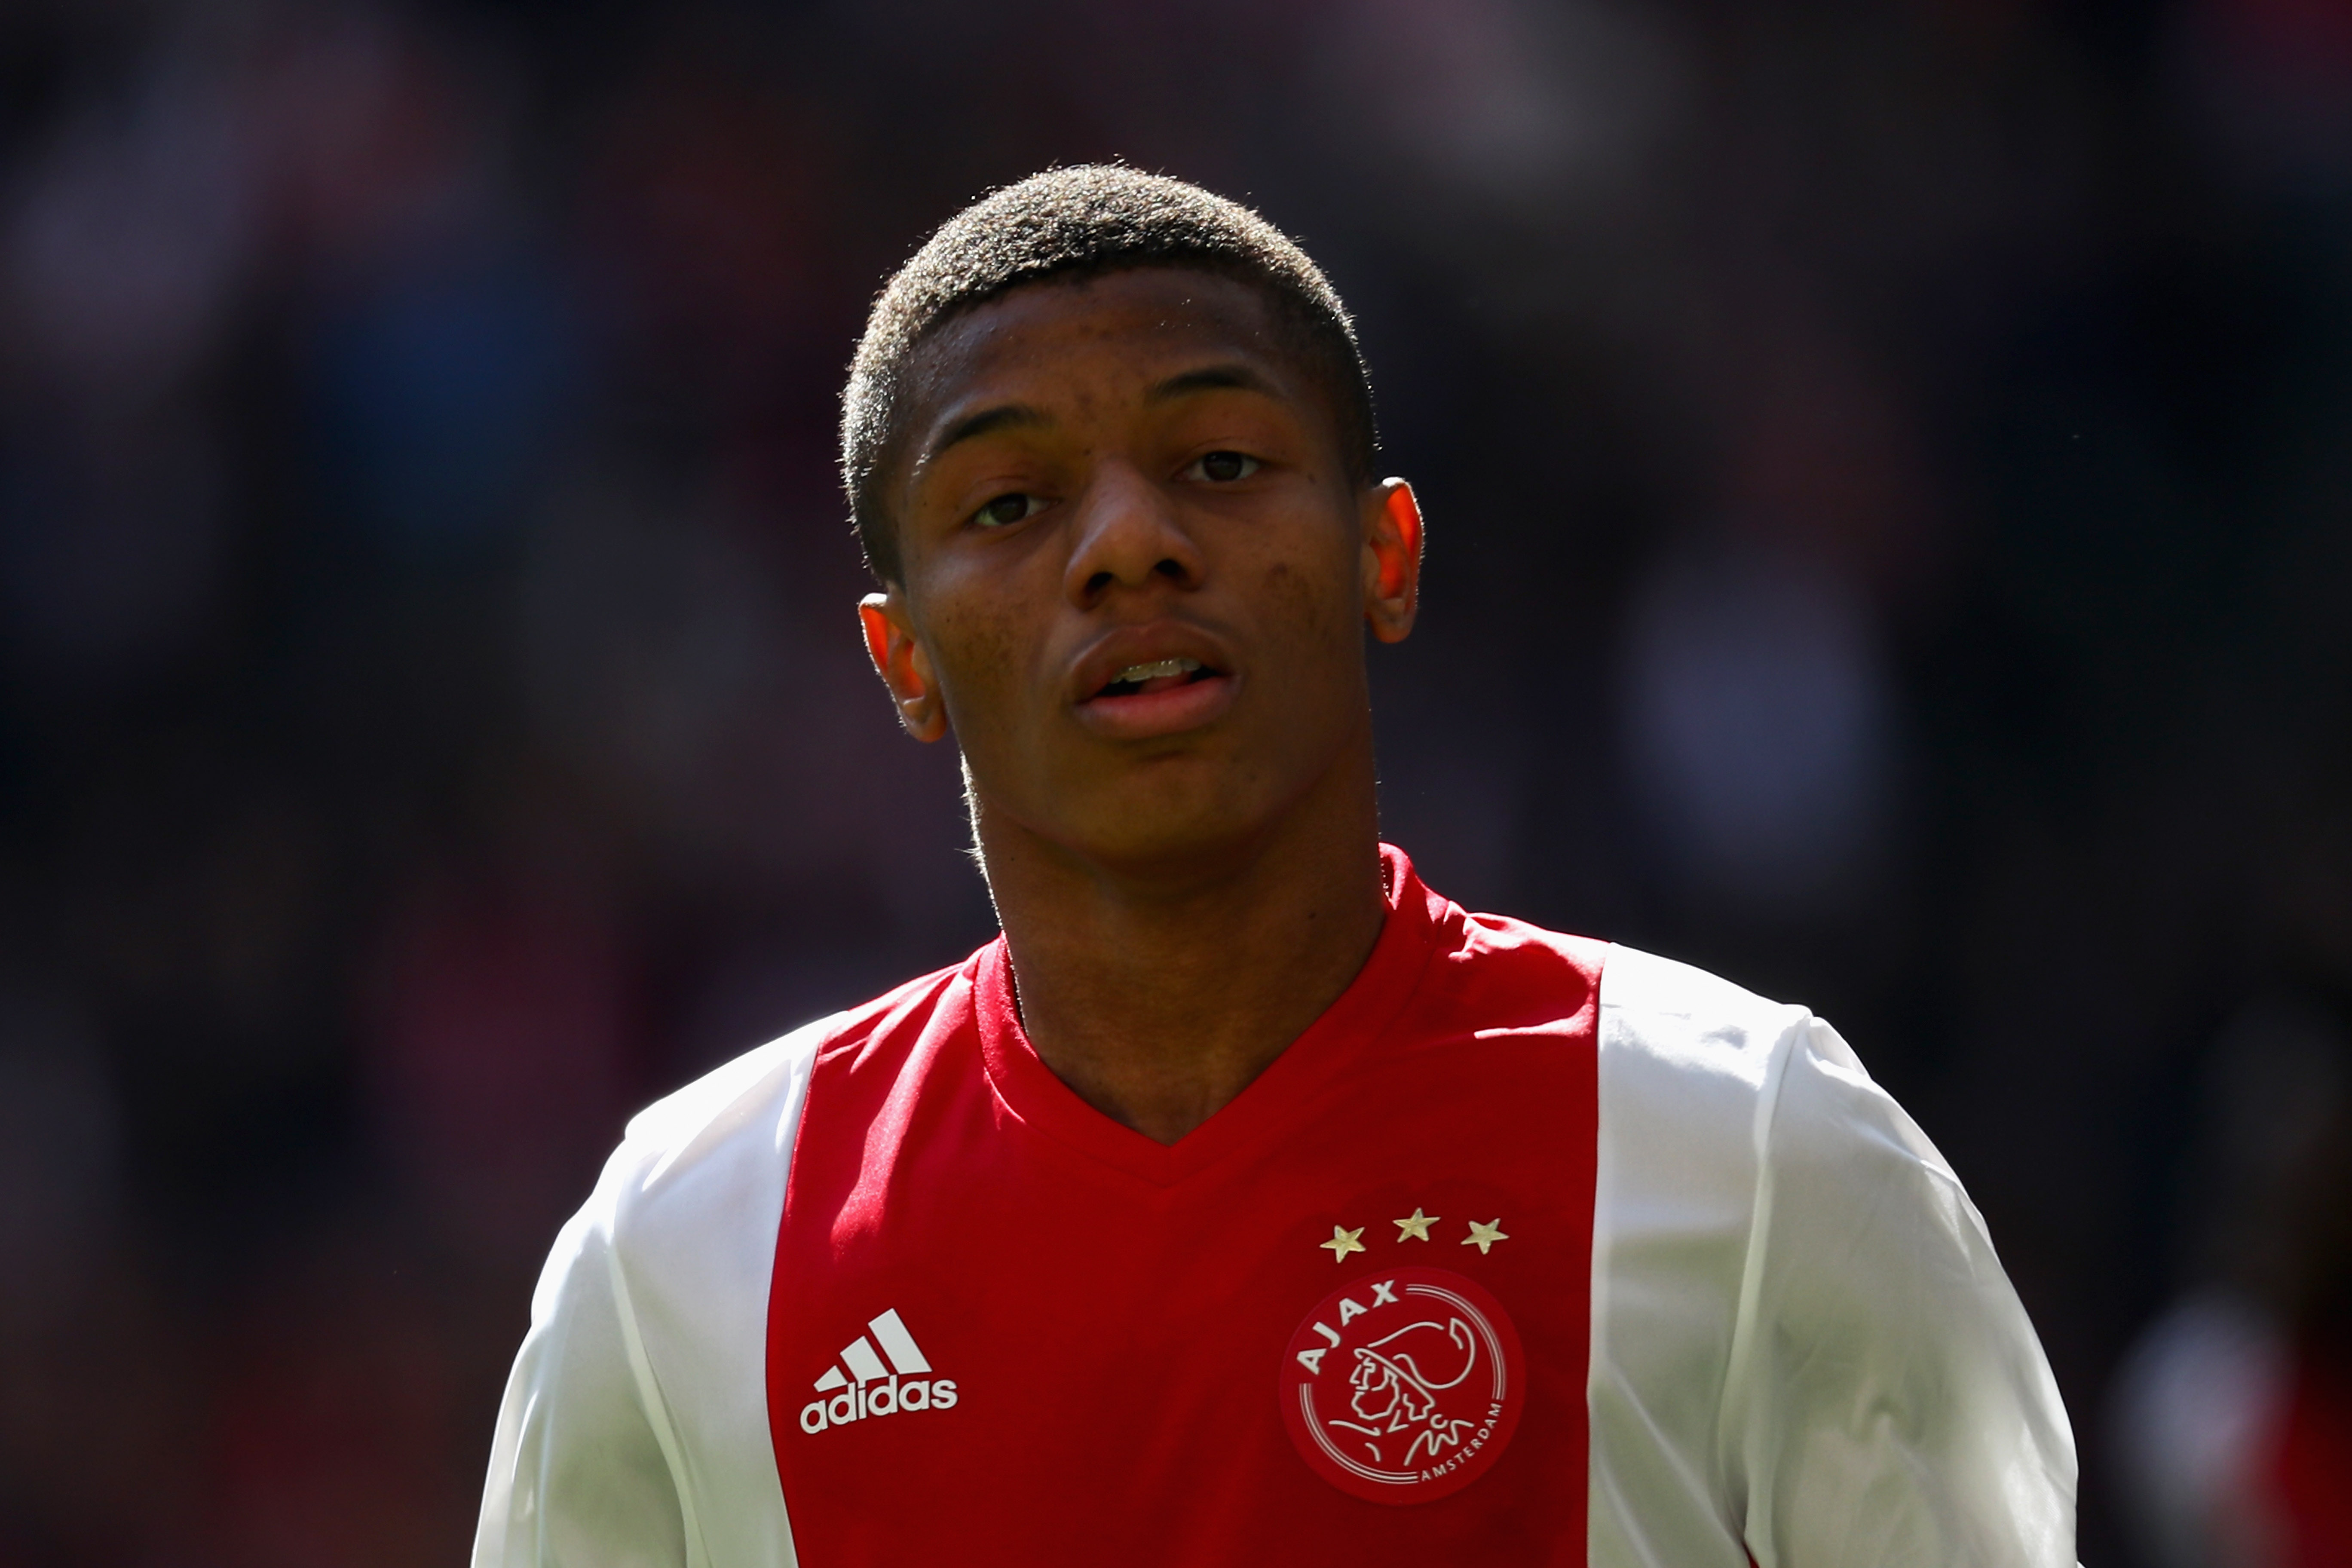 AMSTERDAM, NETHERLANDS - APRIL 02:  David Neres of Ajax looks on during the Dutch Eredivisie match between Ajax Amsterdam and Feyenoord at Amsterdam ArenA on April 2, 2017 in Amsterdam, Netherlands.  (Photo by Dean Mouhtaropoulos/Getty Images)